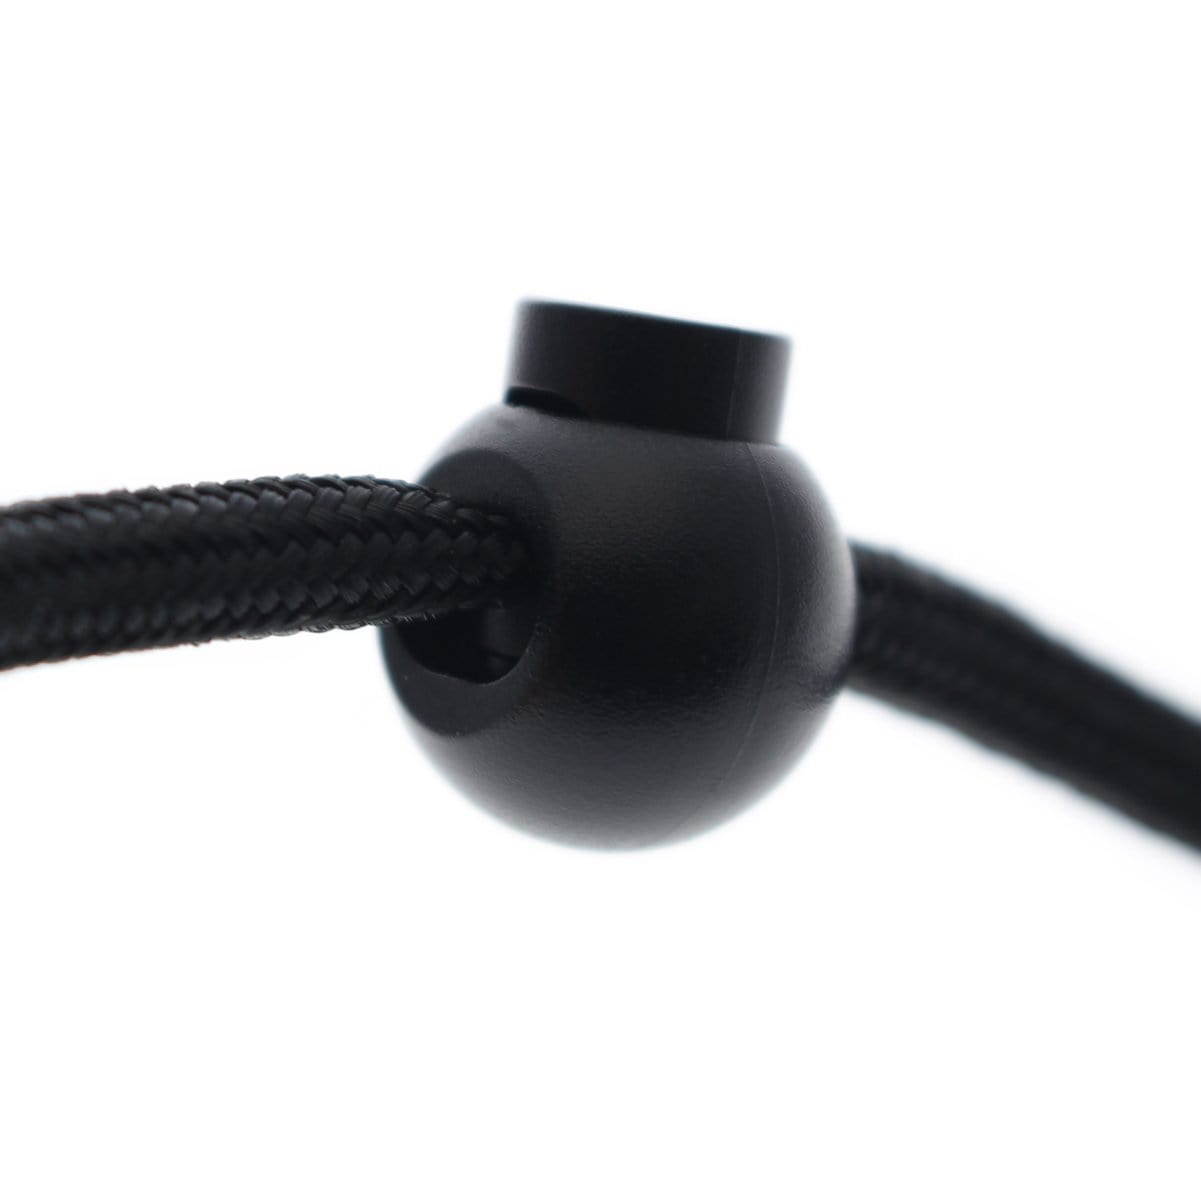 Close-up of a black Adjustable Cord Lock - Round Ball Style - Single Hole End Toggle for DIY Projects (2135-4001) securing two intertwined black cords against a white background.